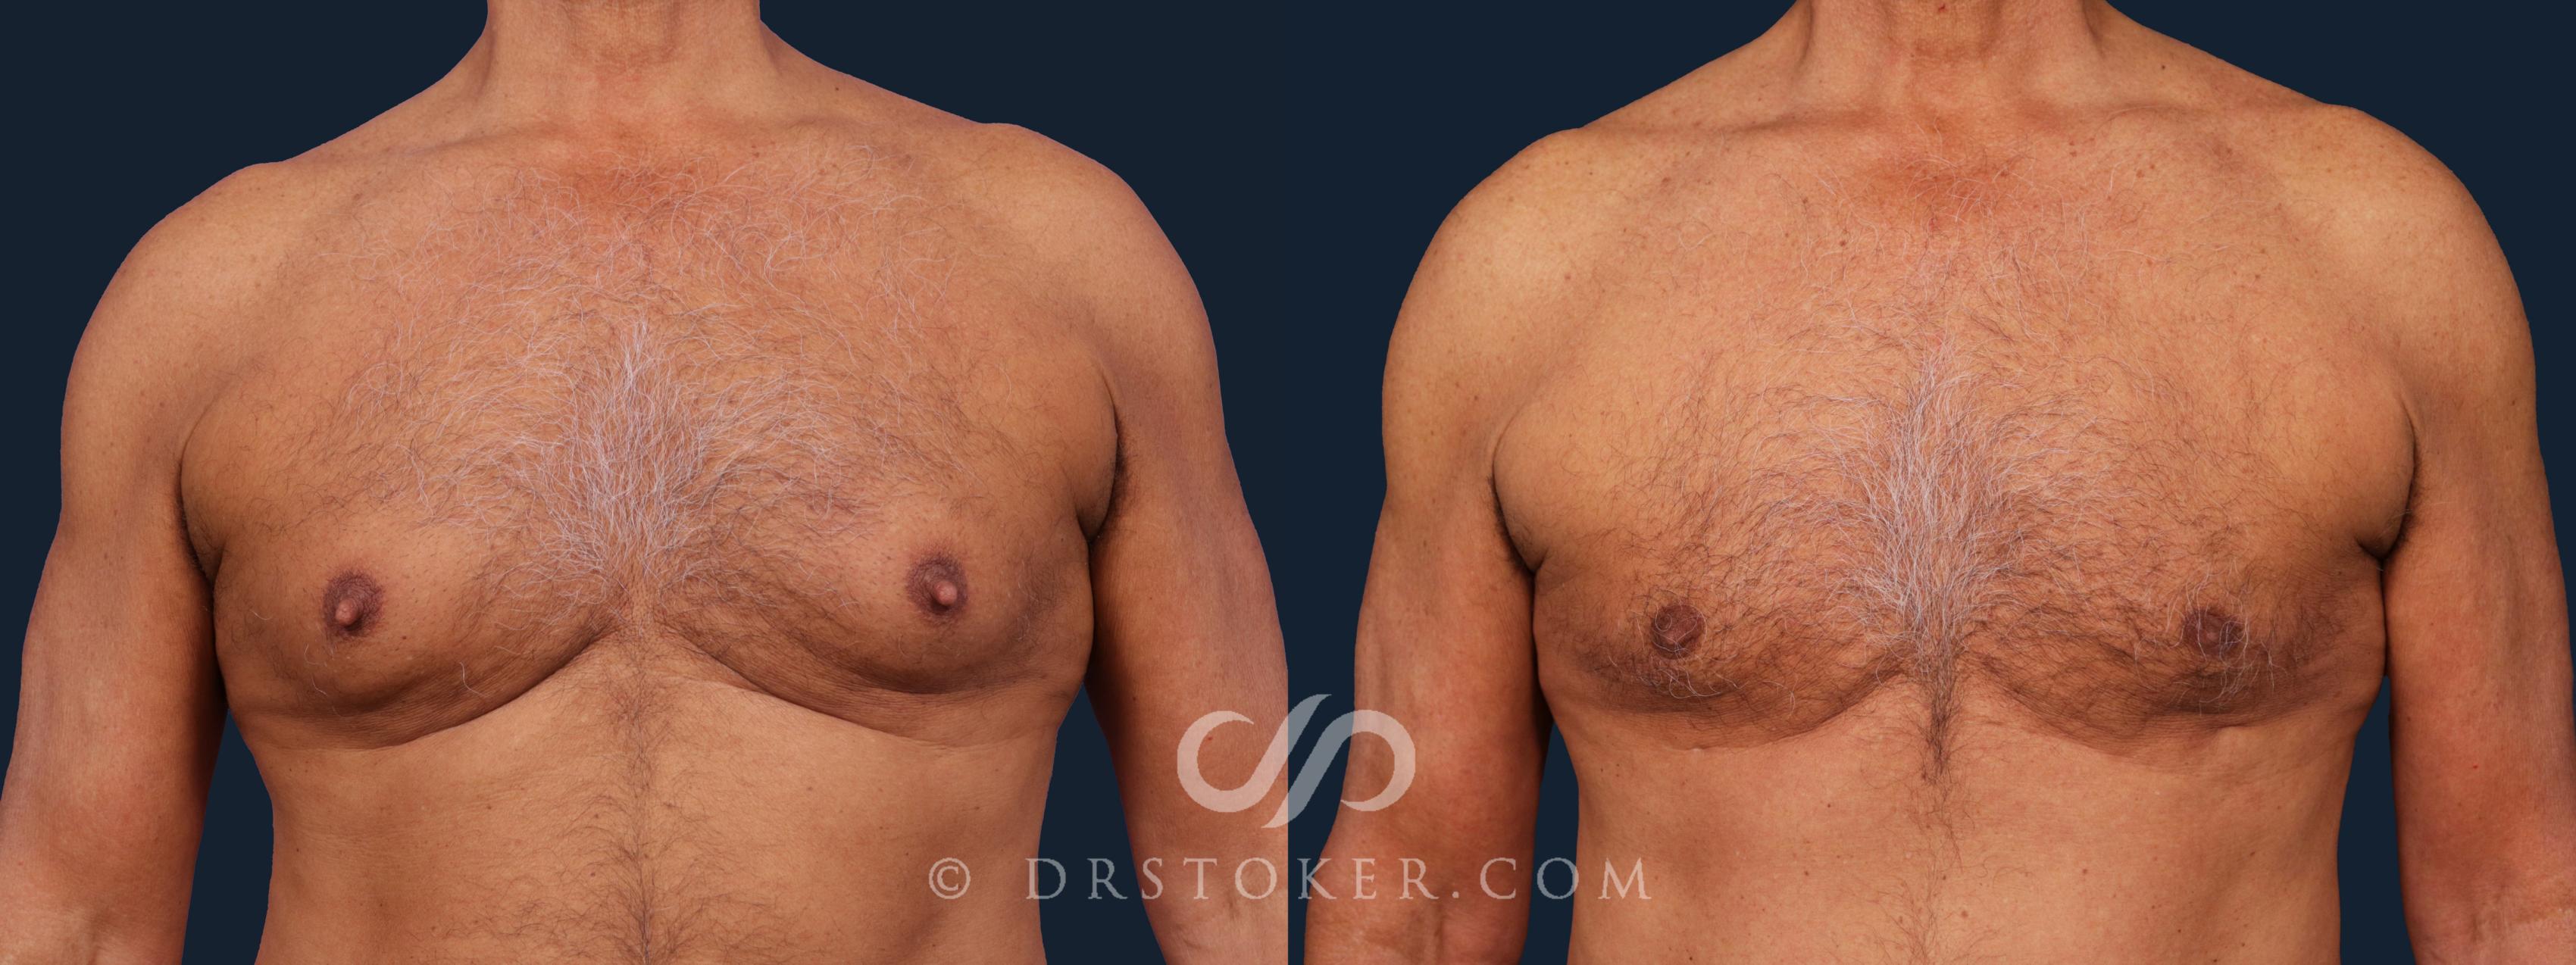 Before & After Breast Reduction for Men (Gynecomastia) Case 2023 Front View in Los Angeles, CA